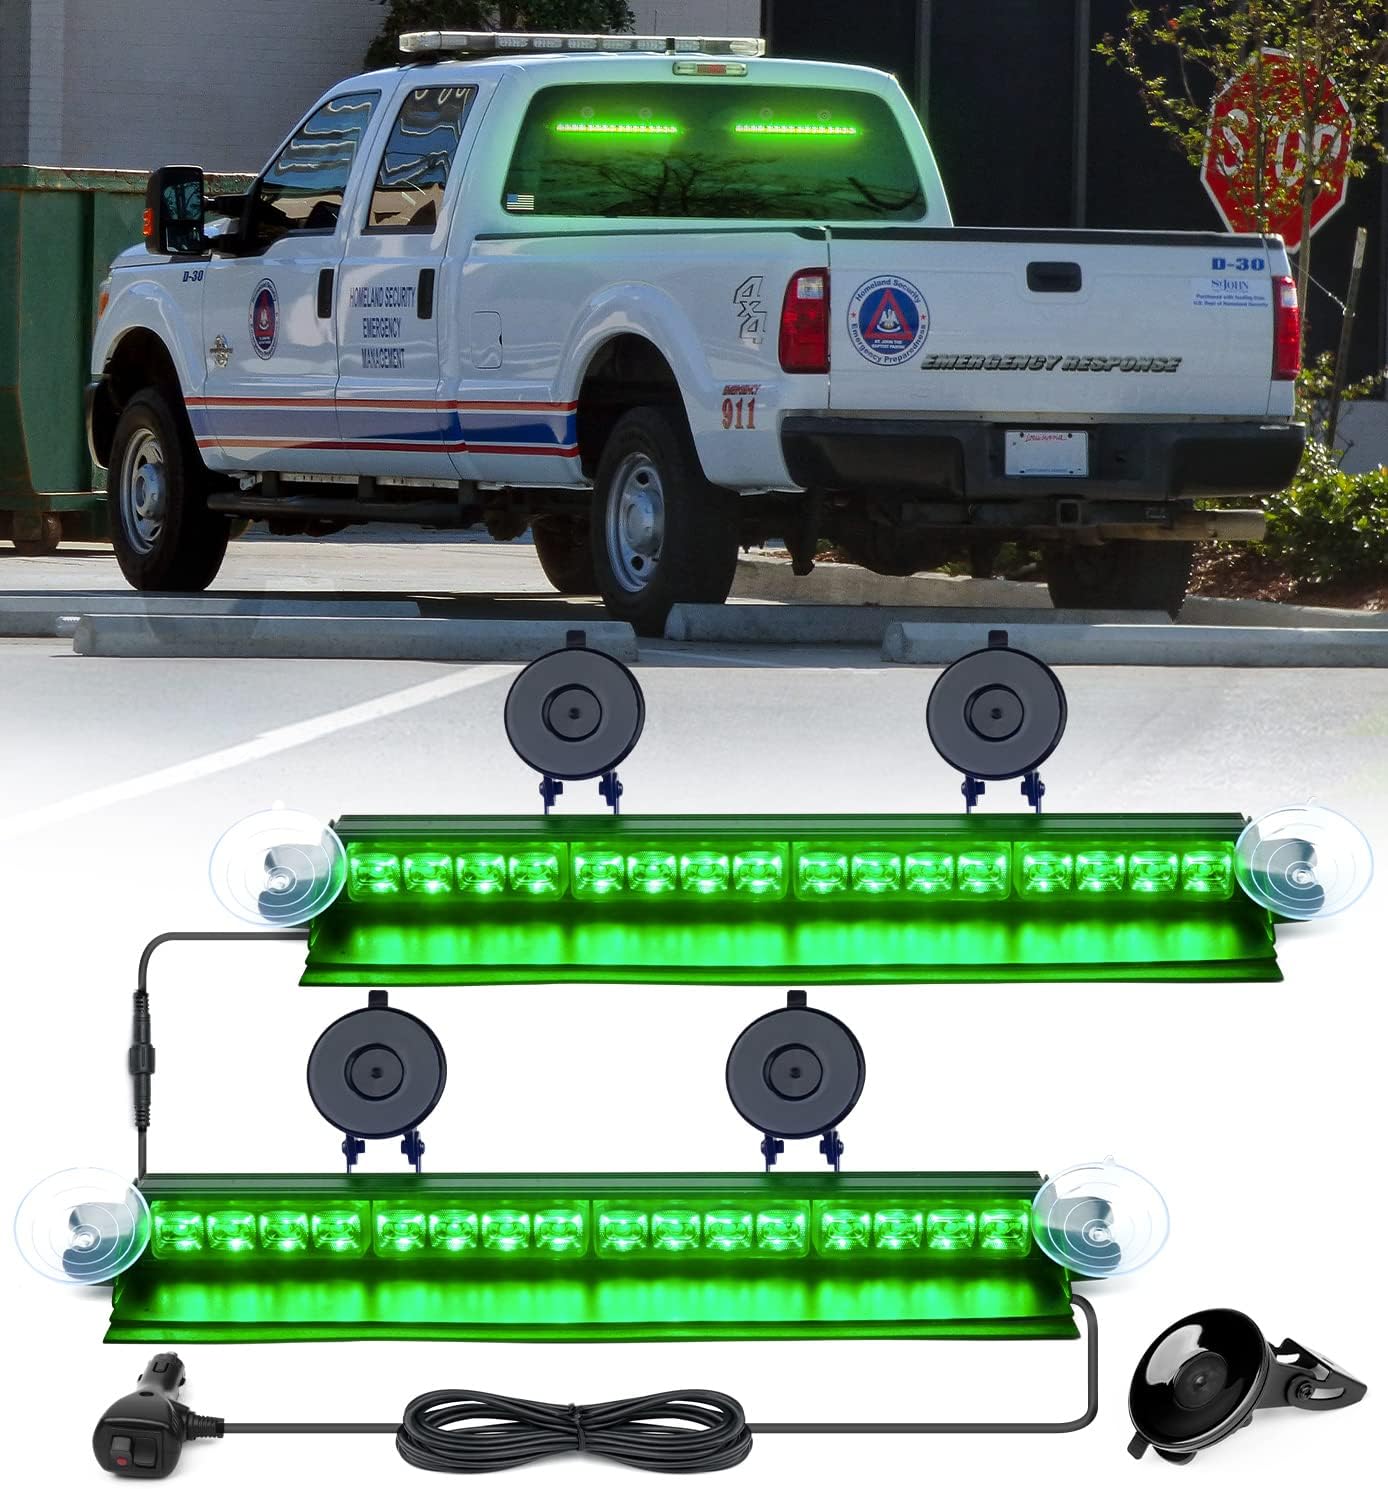 Windshield Dash Strobe Light with Suction Cups